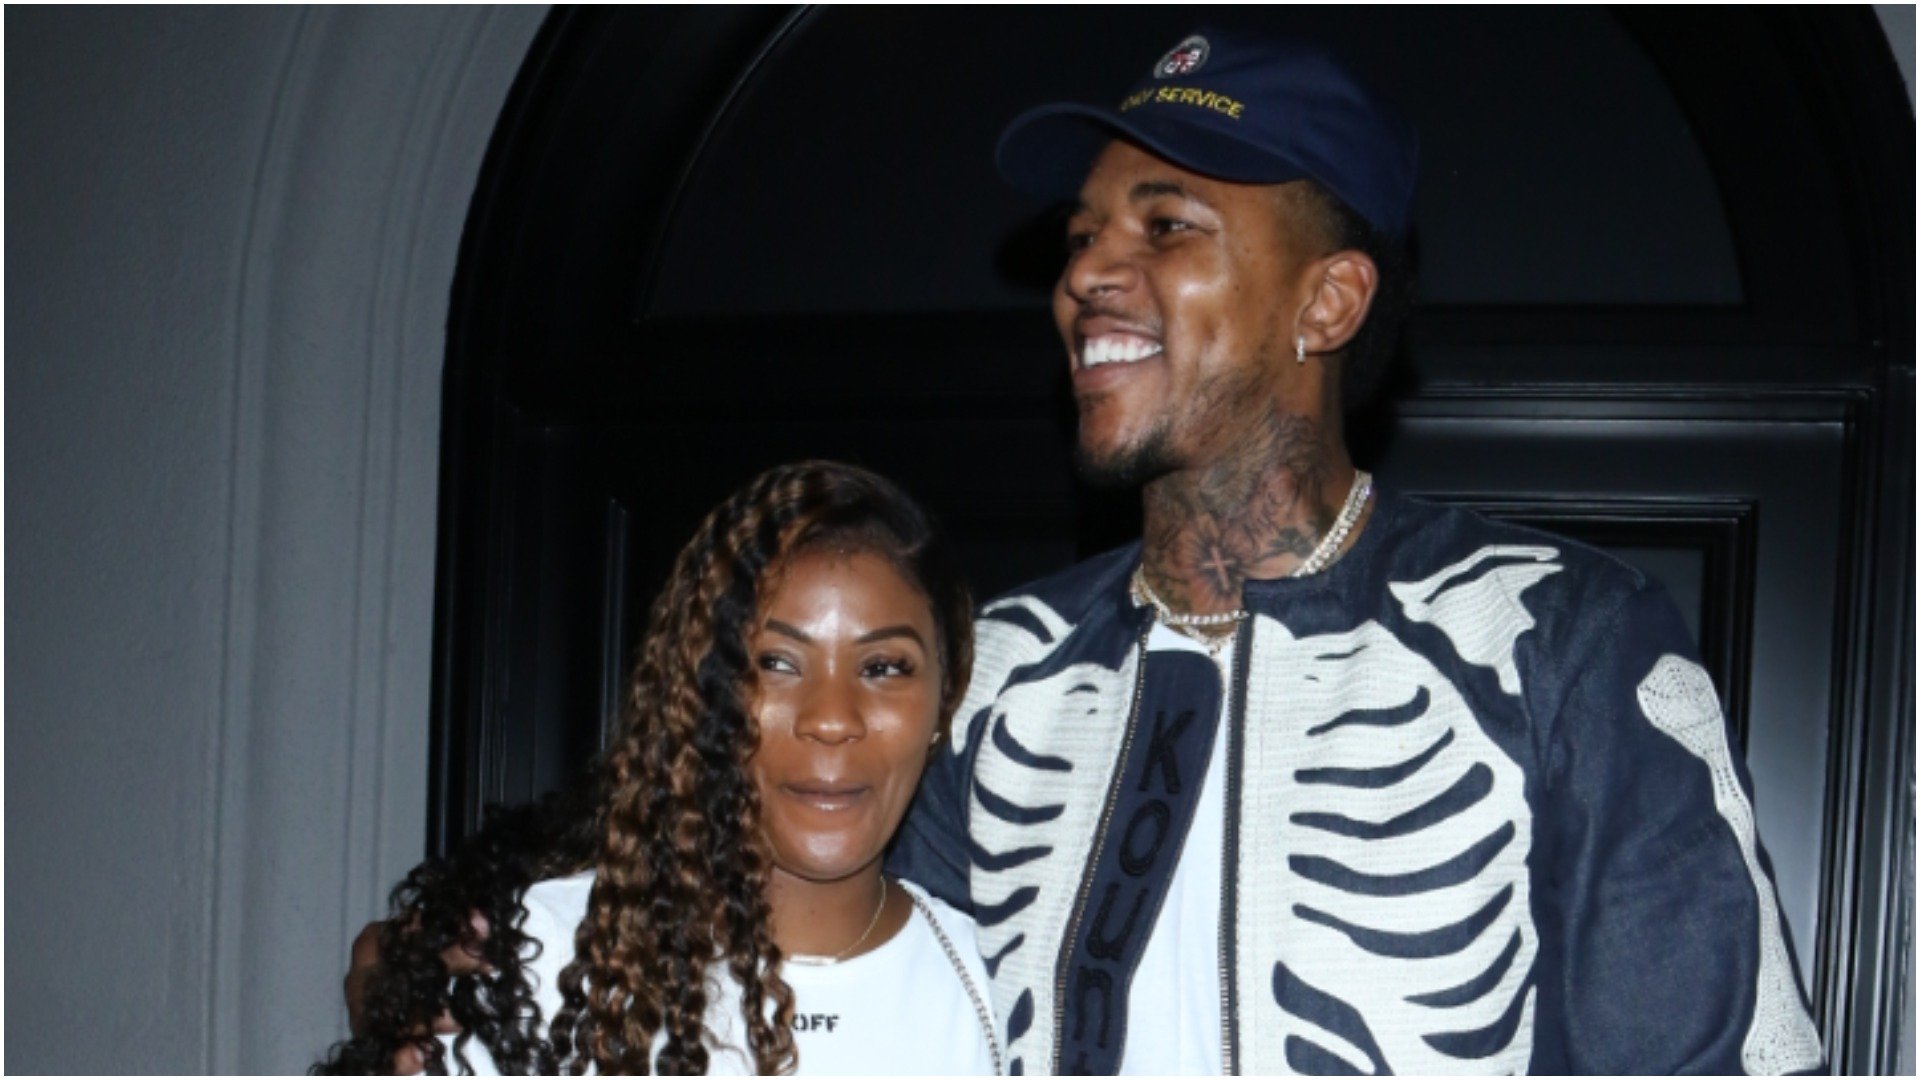 Keonna Green and Nick Young smile for a photo while out on the town 